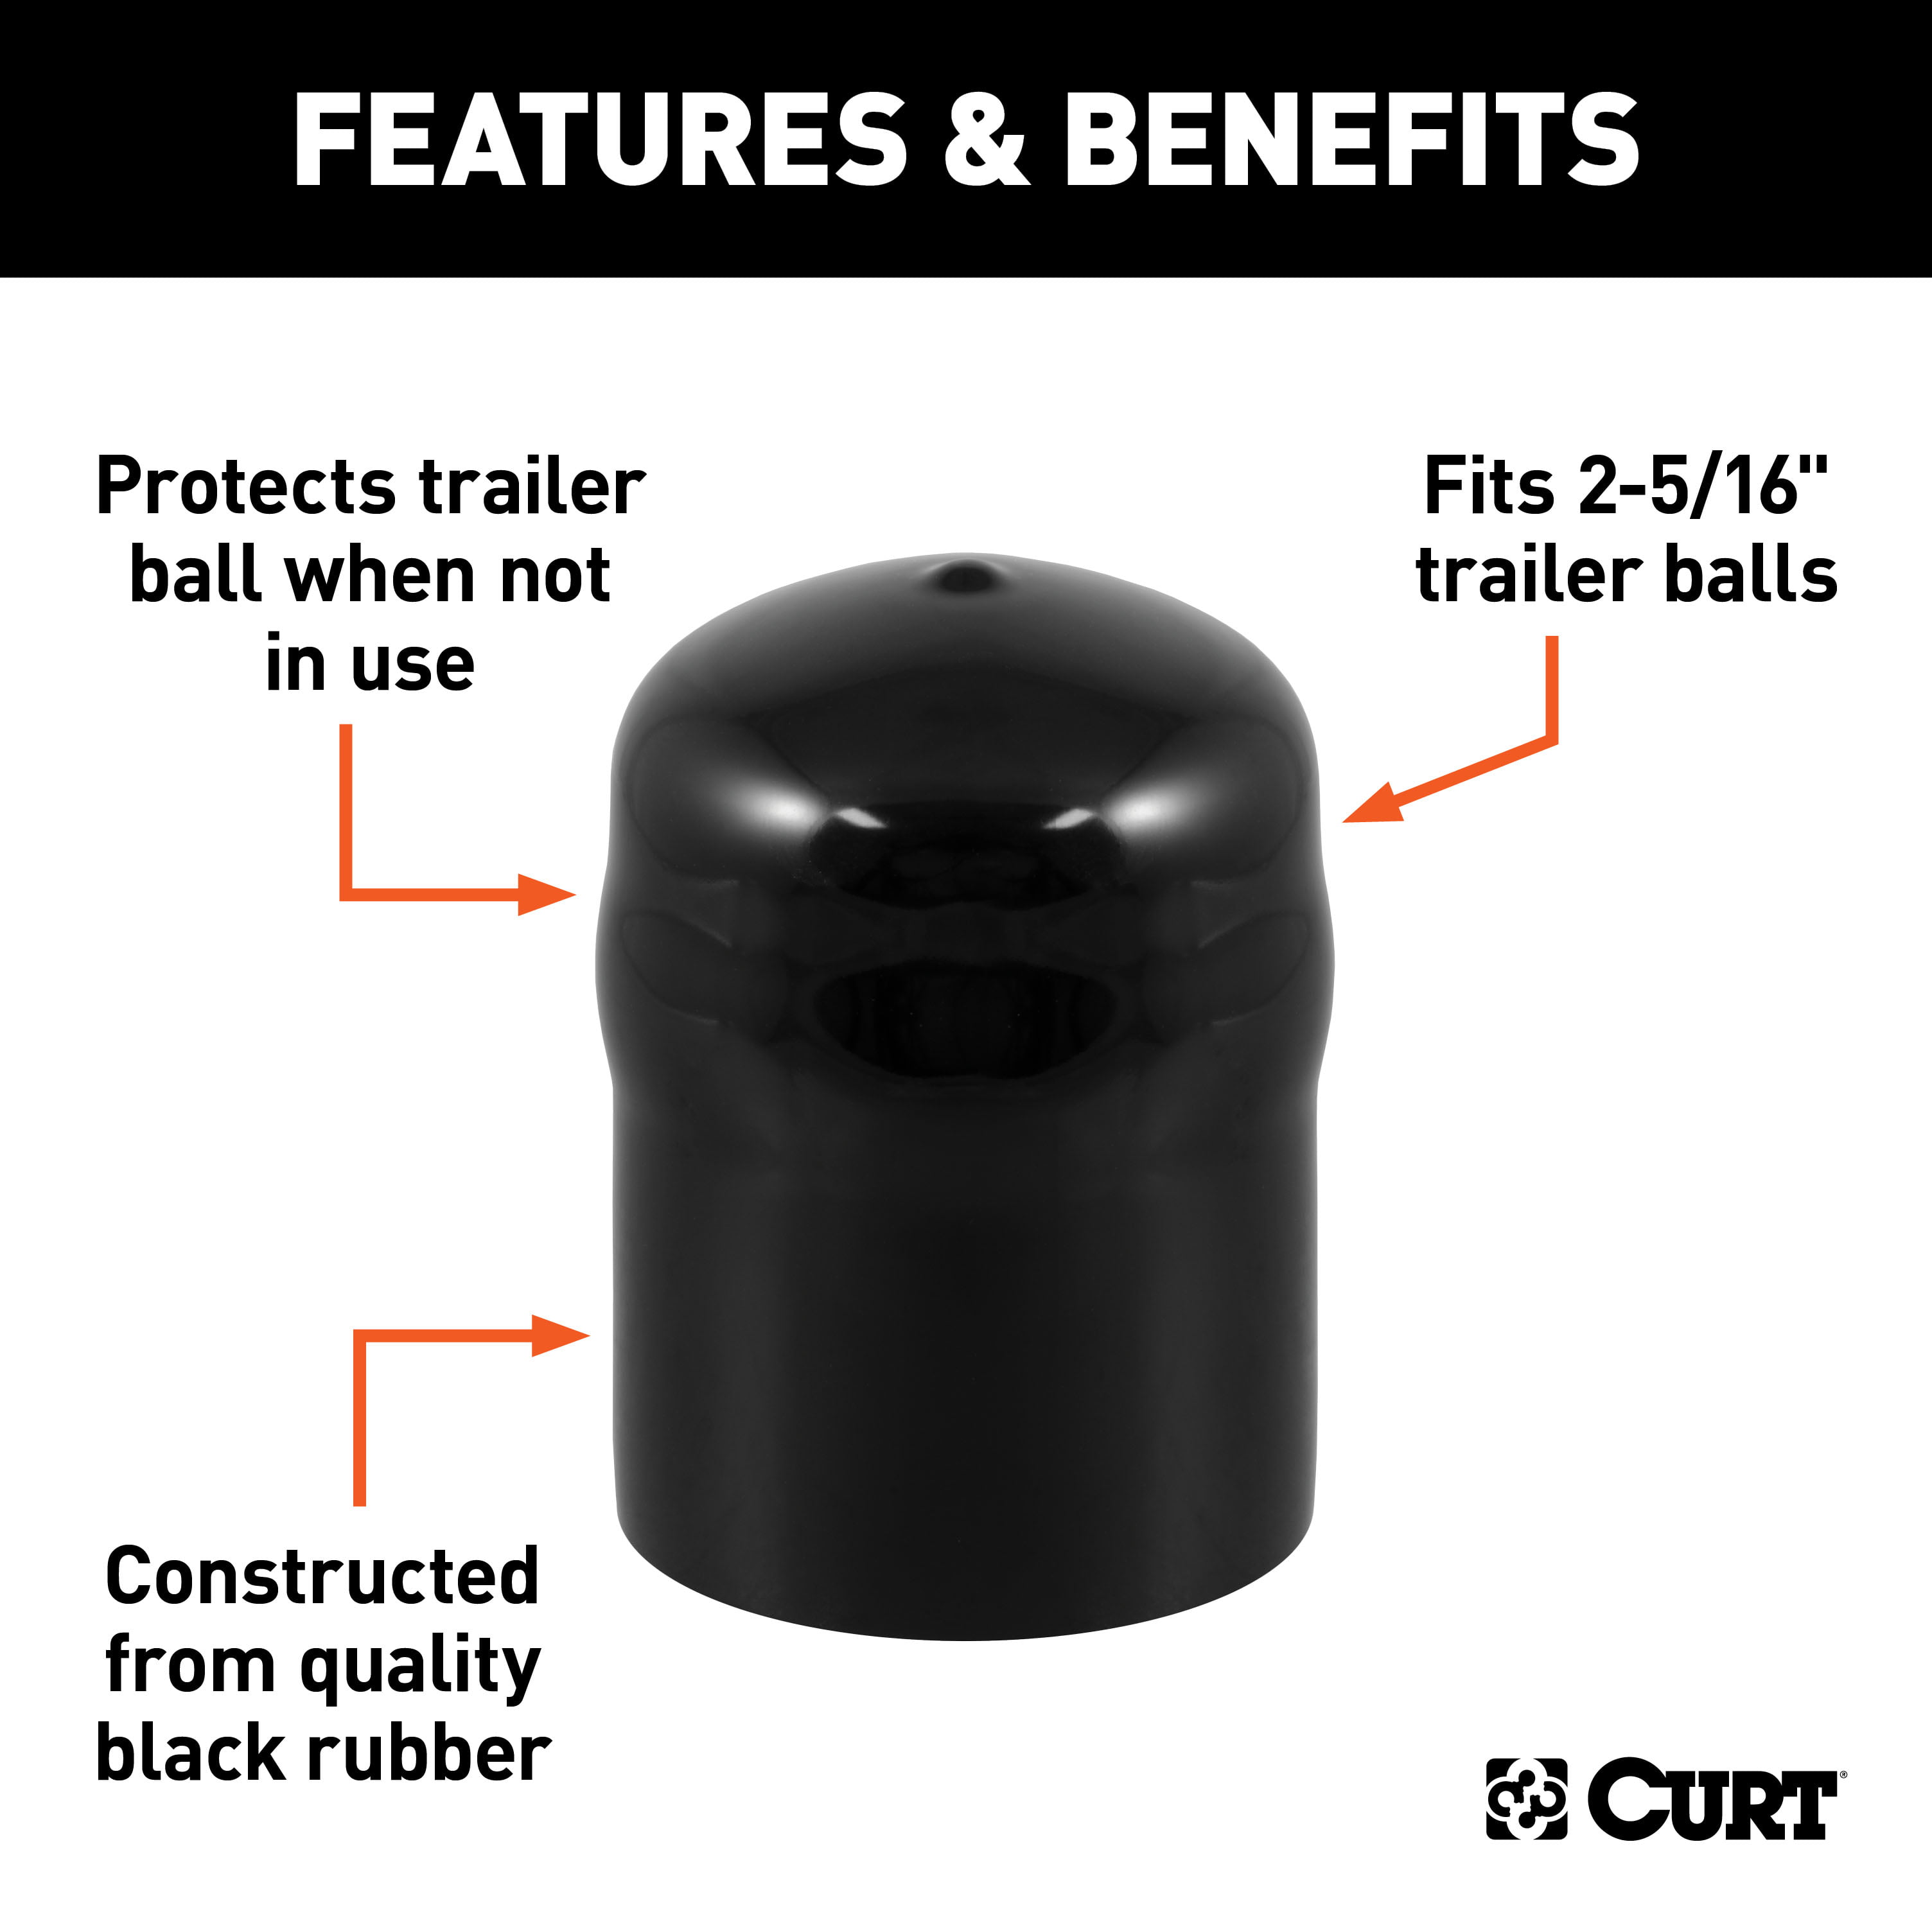 for ball head hitches with up to Ø 50 mm Tow Bar Cover made of rubber abrasion & dirt protection Tow Ball Cover Trailer Hitch Ball Cover Pack of 2 Rubber Ball Cover 2 inch car wash proof